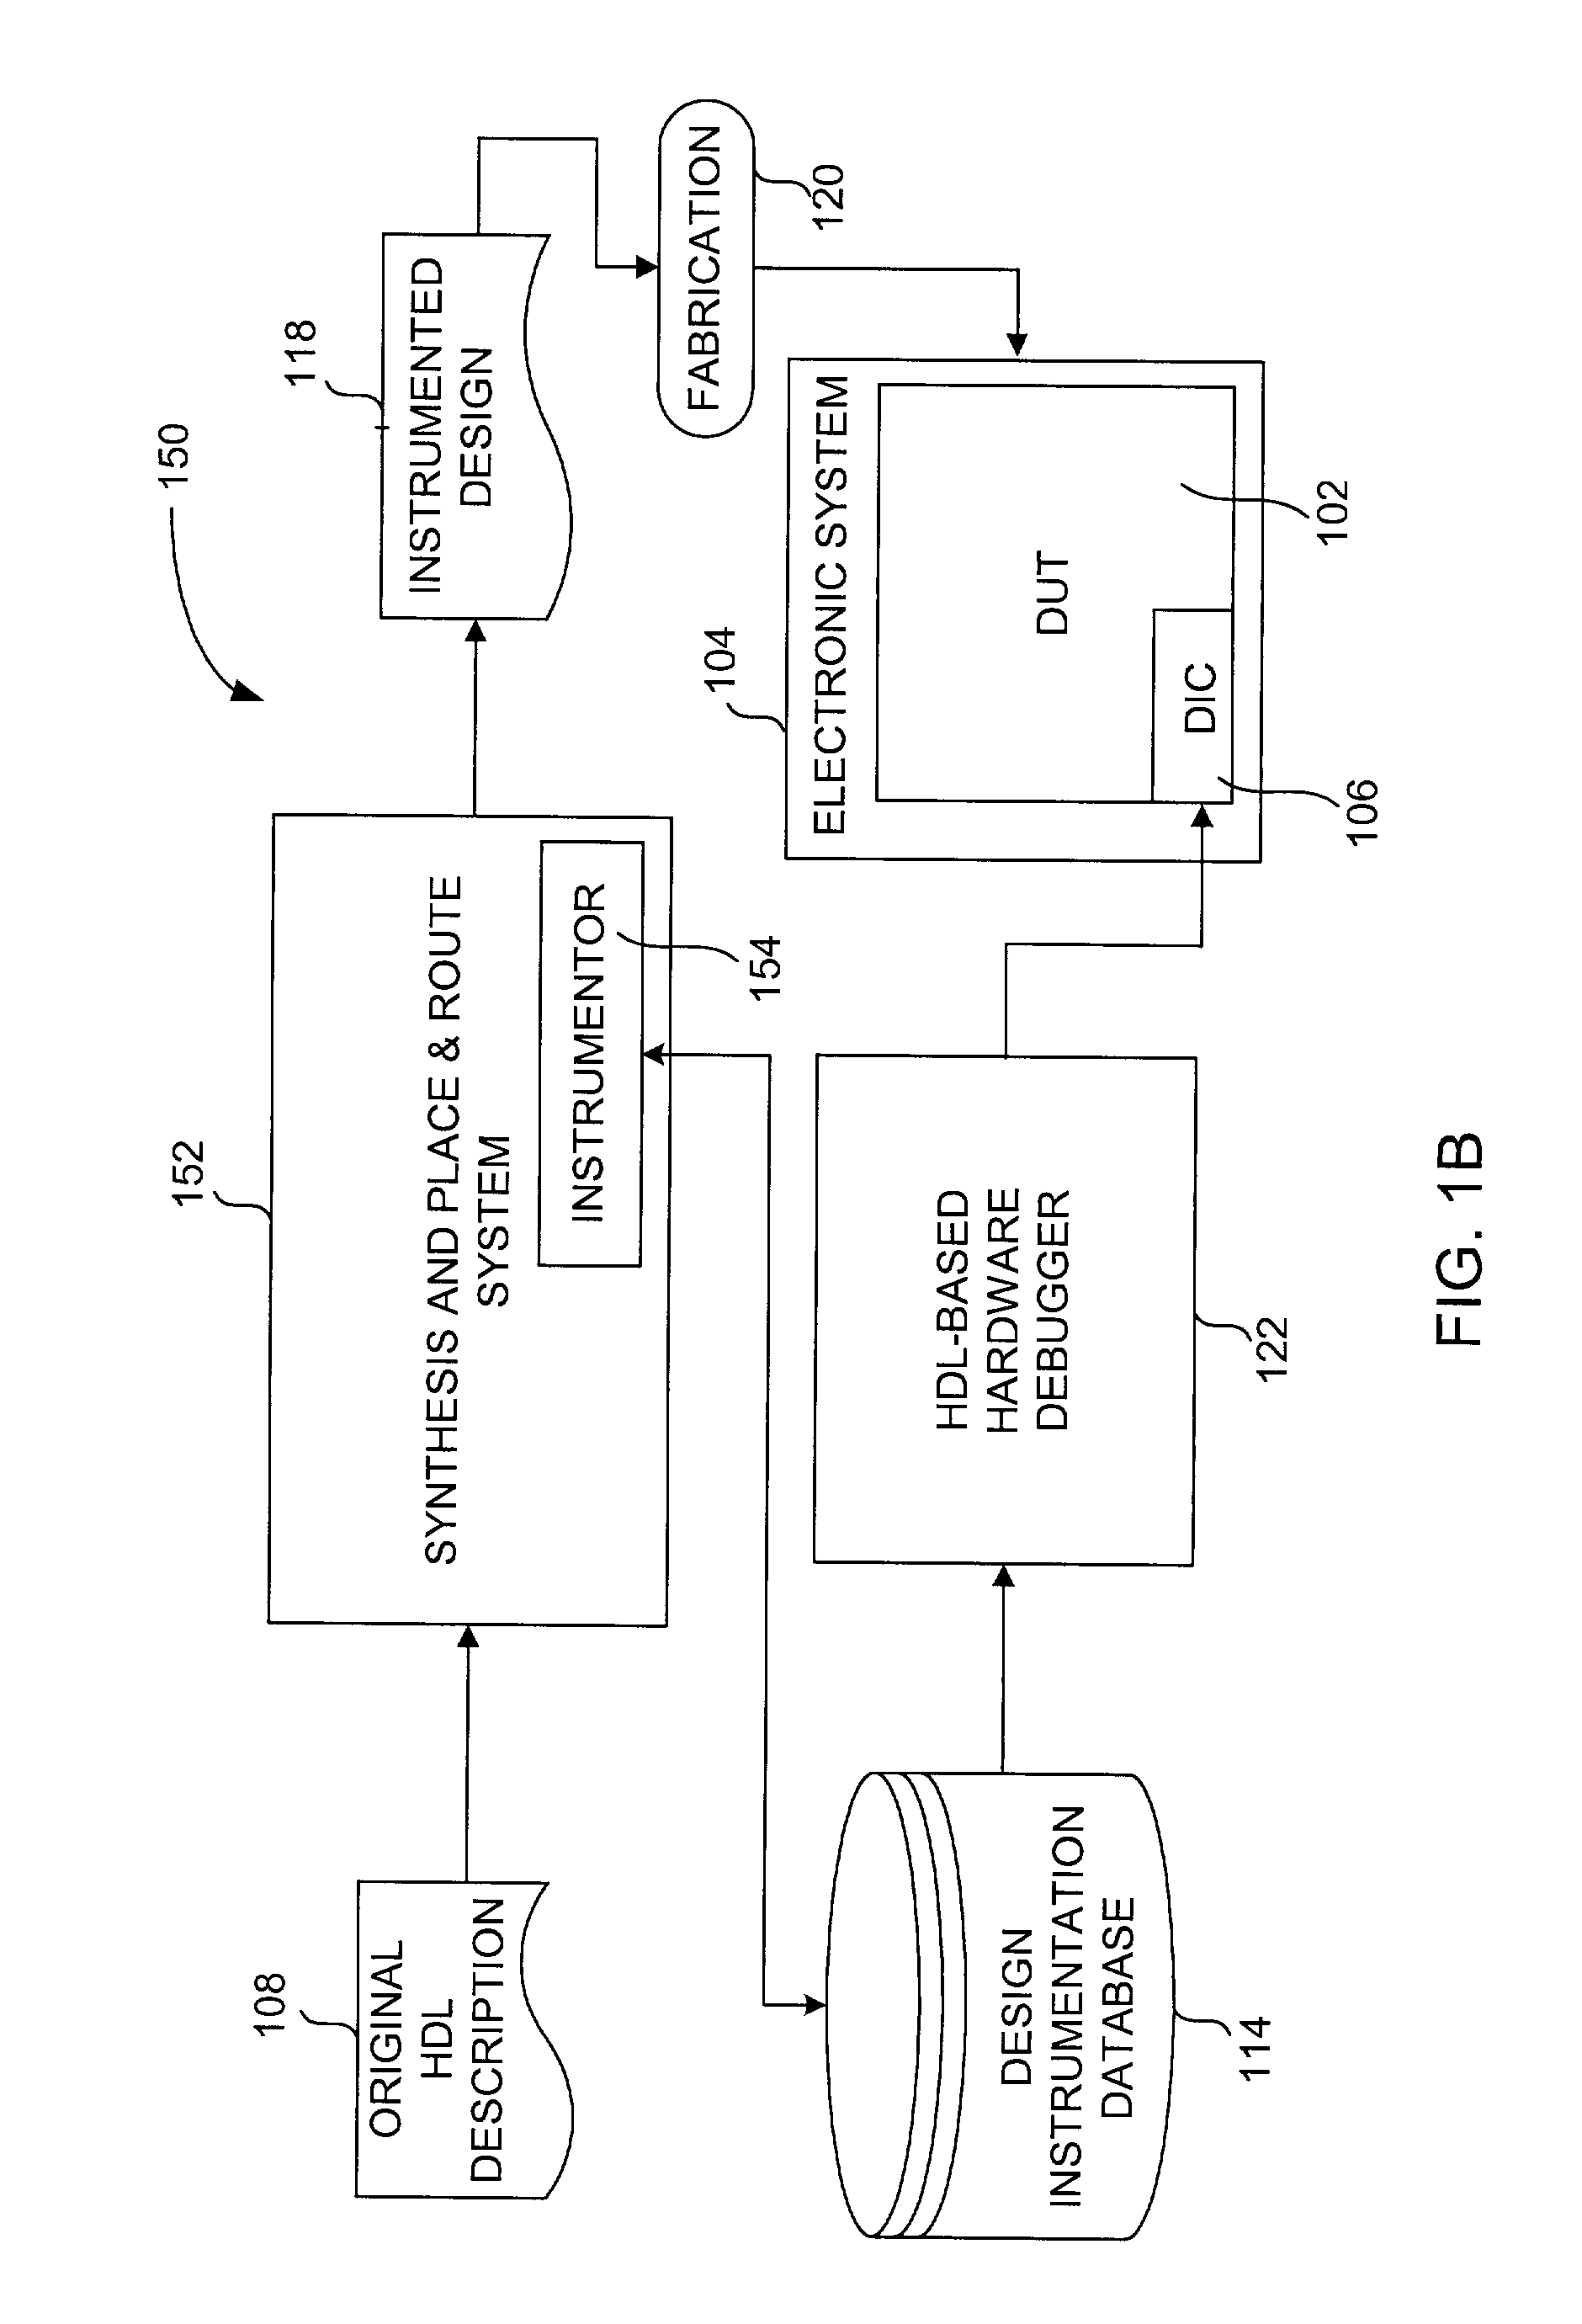 Method and system for debugging an electronic system using instrumentation circuitry and a logic analyzer